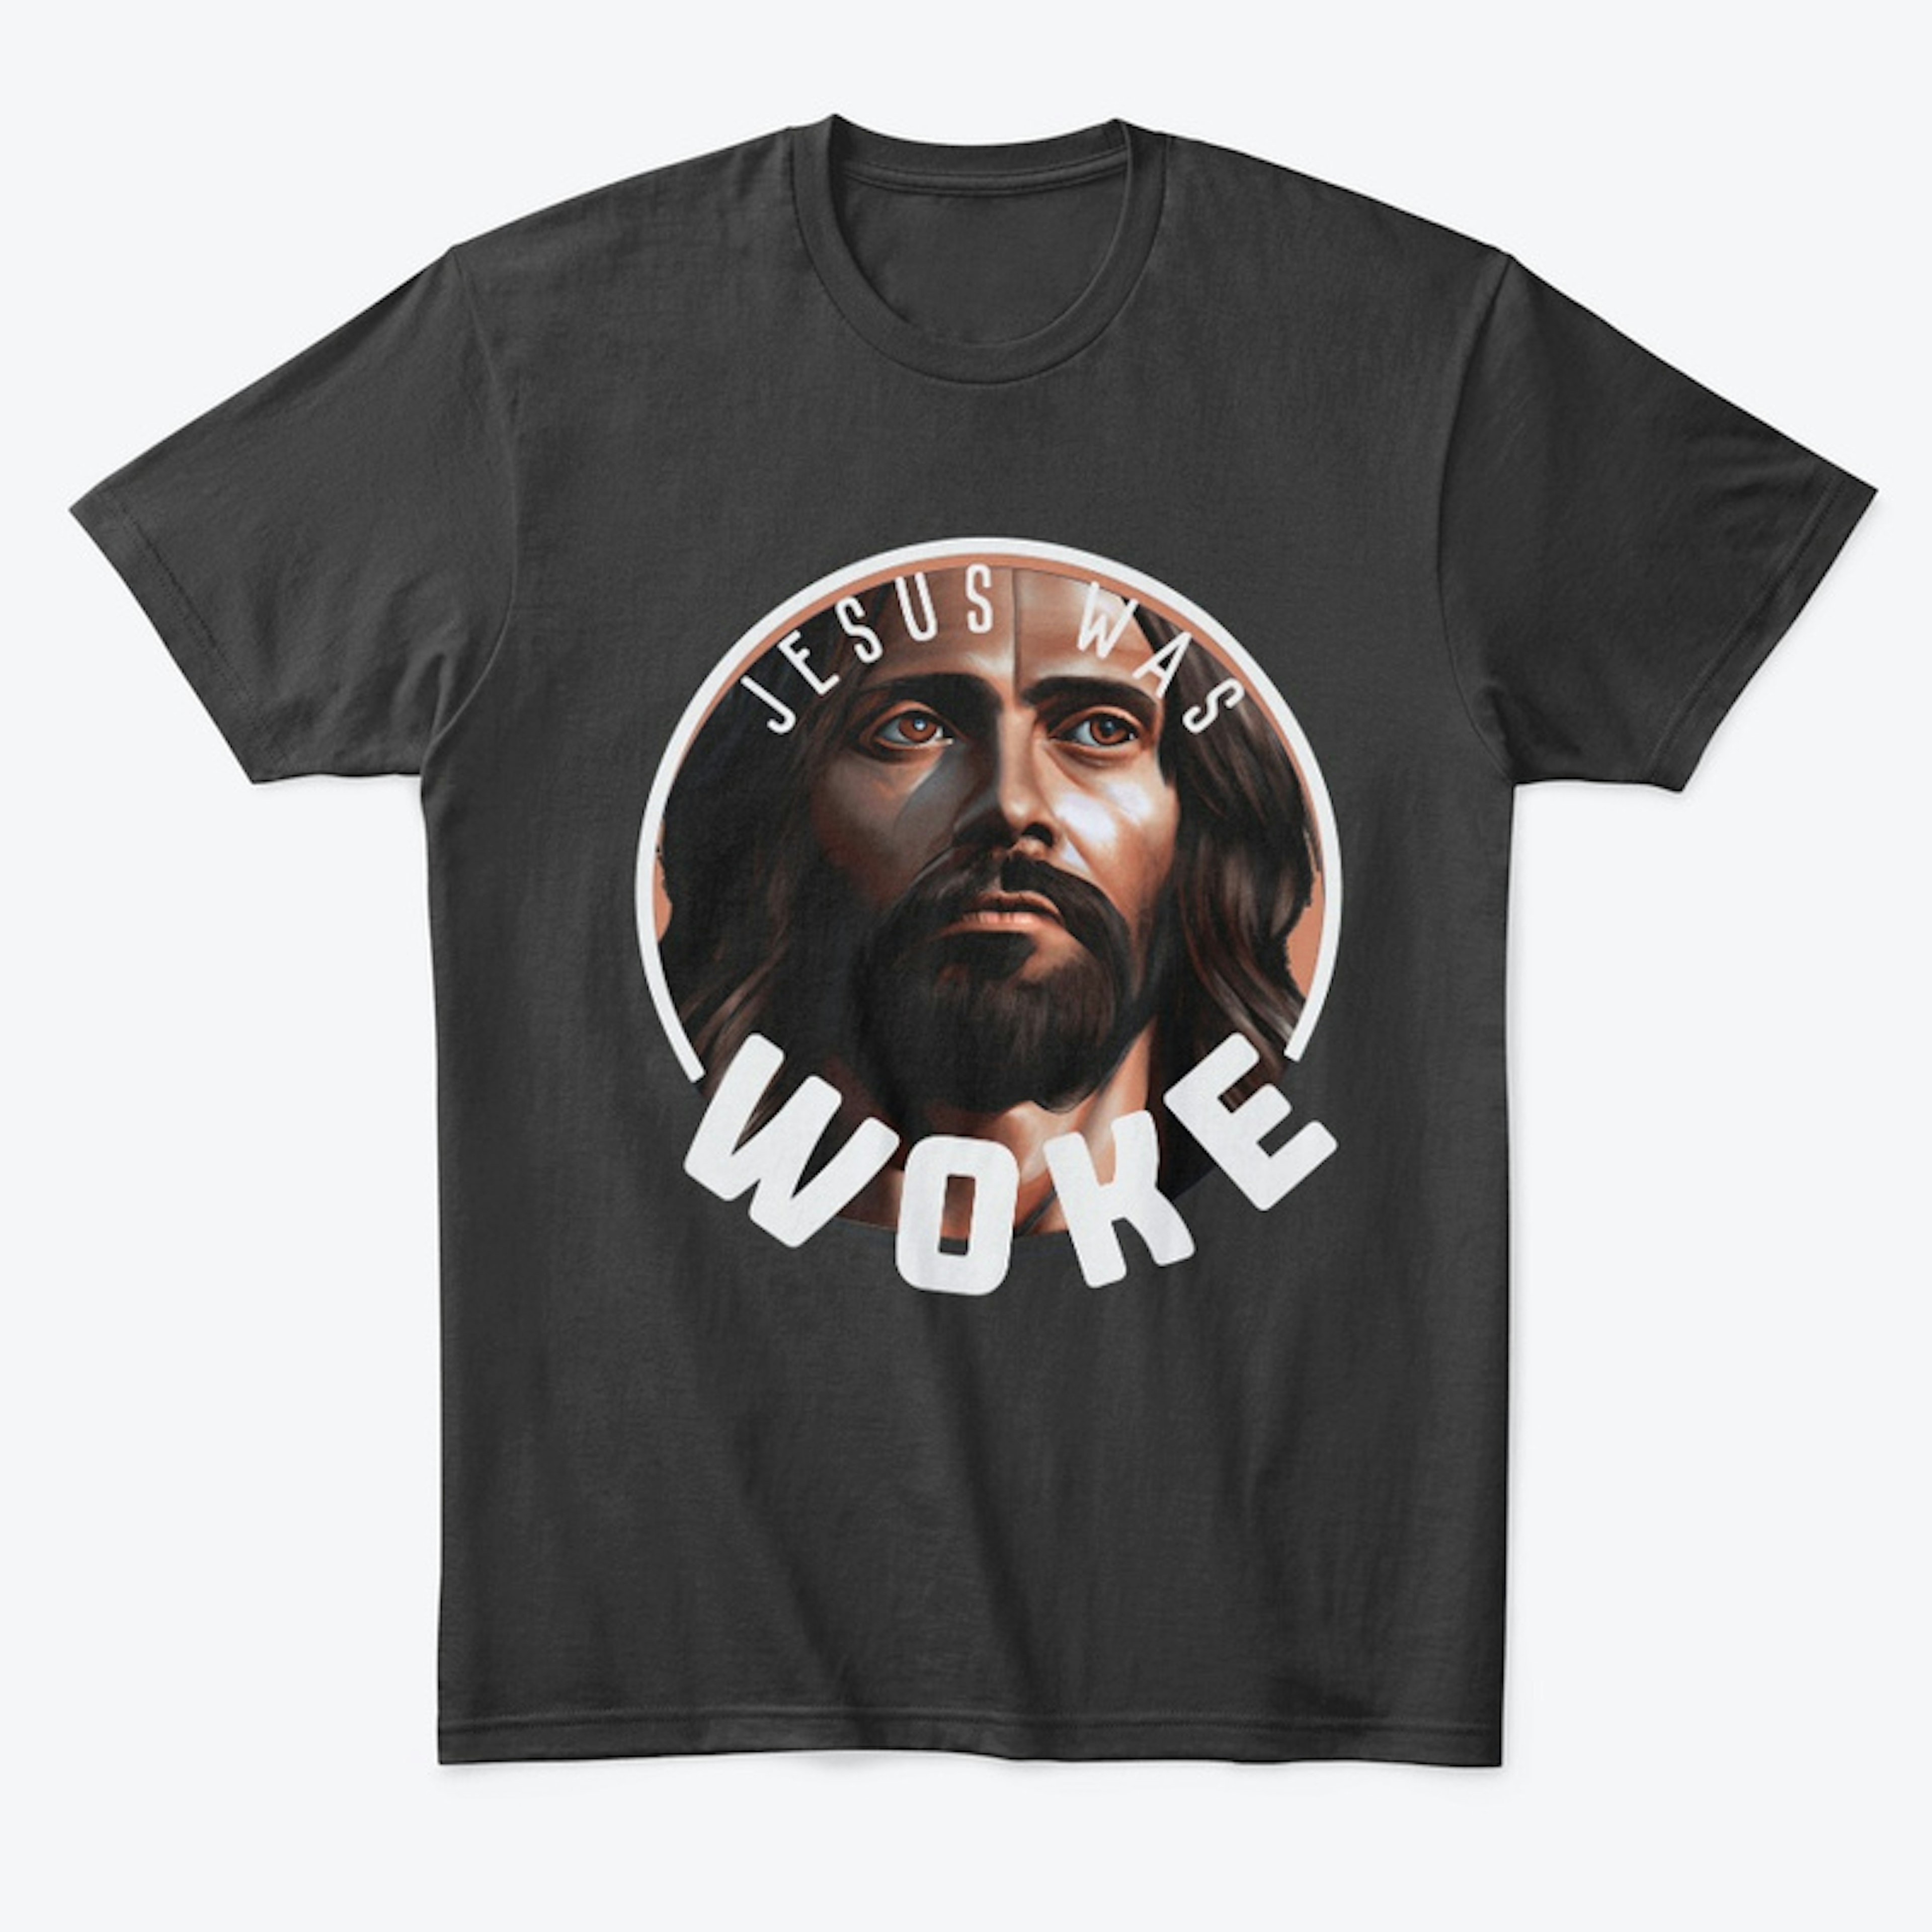 Jesus Is - Was - and Always Will Be Woke